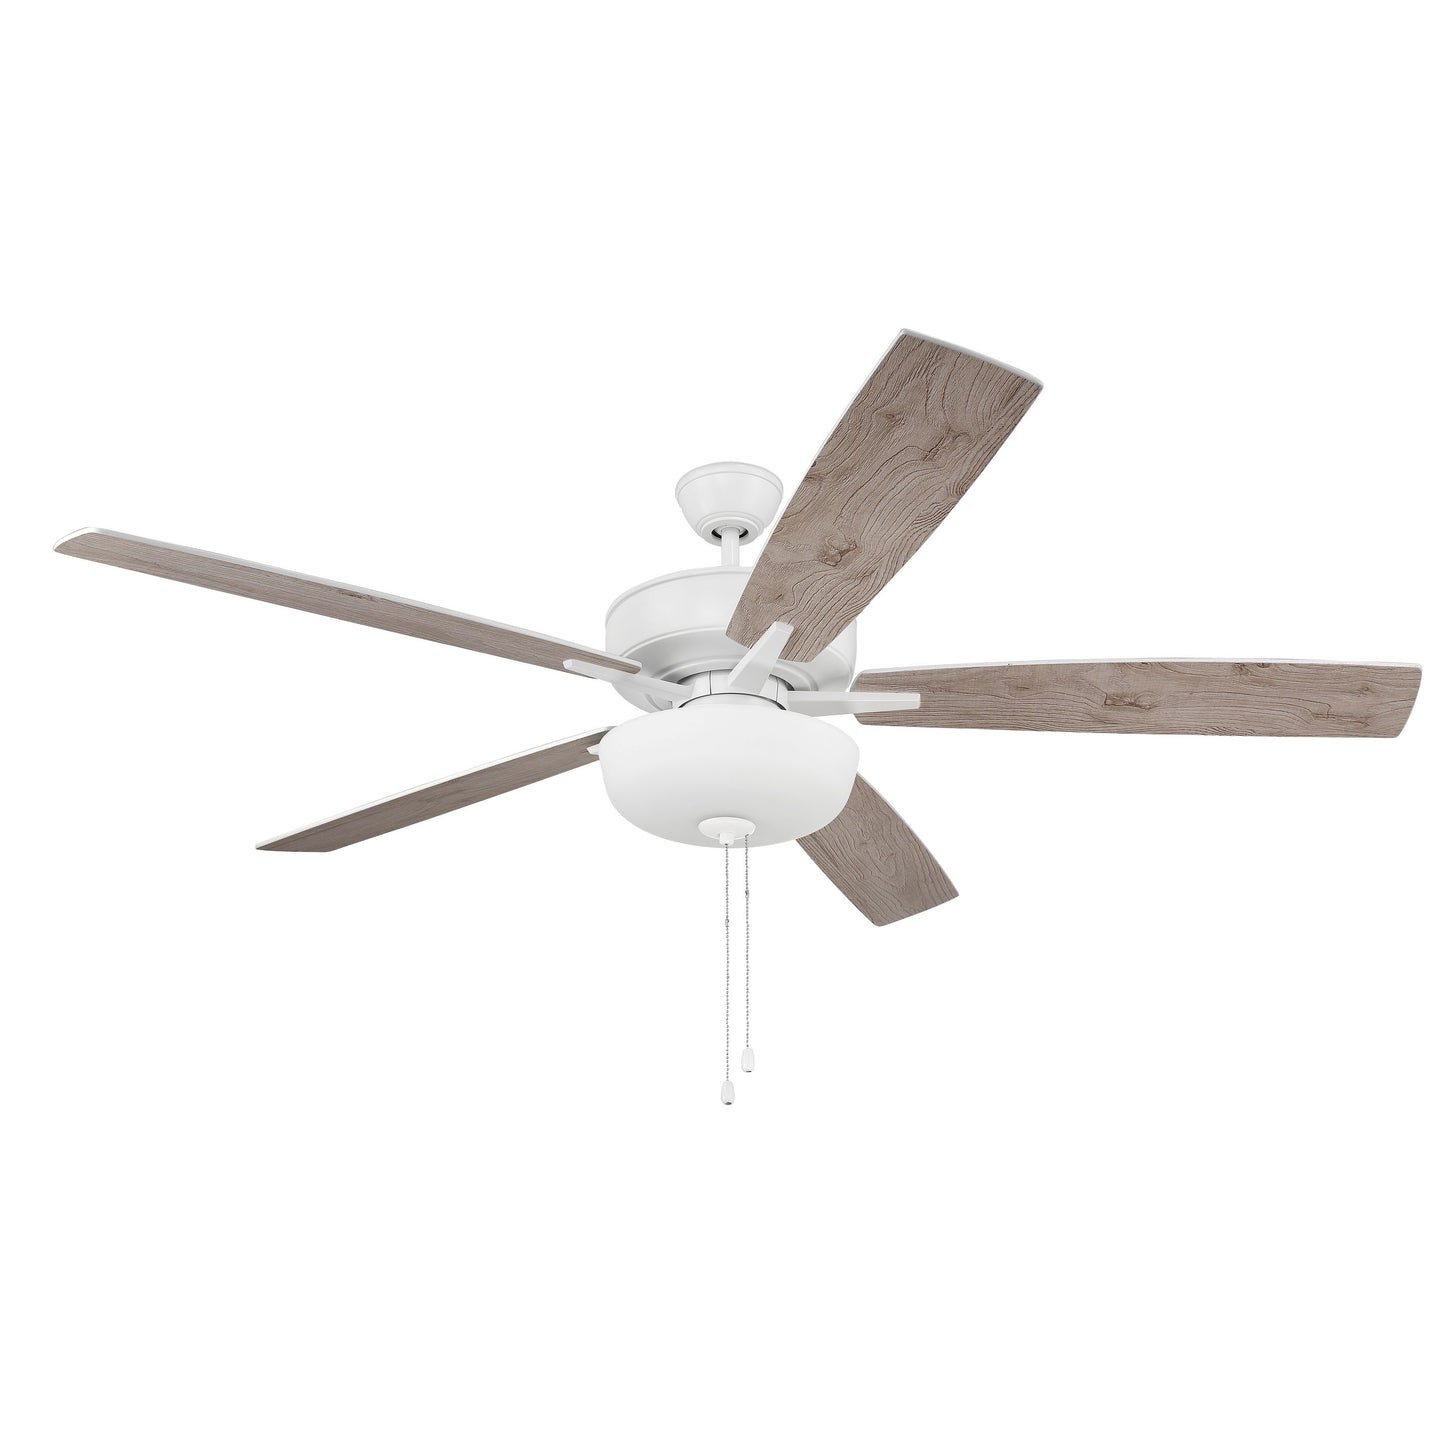 S111W5-60WWOK - Super Pro 111 60" 5 Blade Ceiling Fan with Light Kit - Pull Chain - White